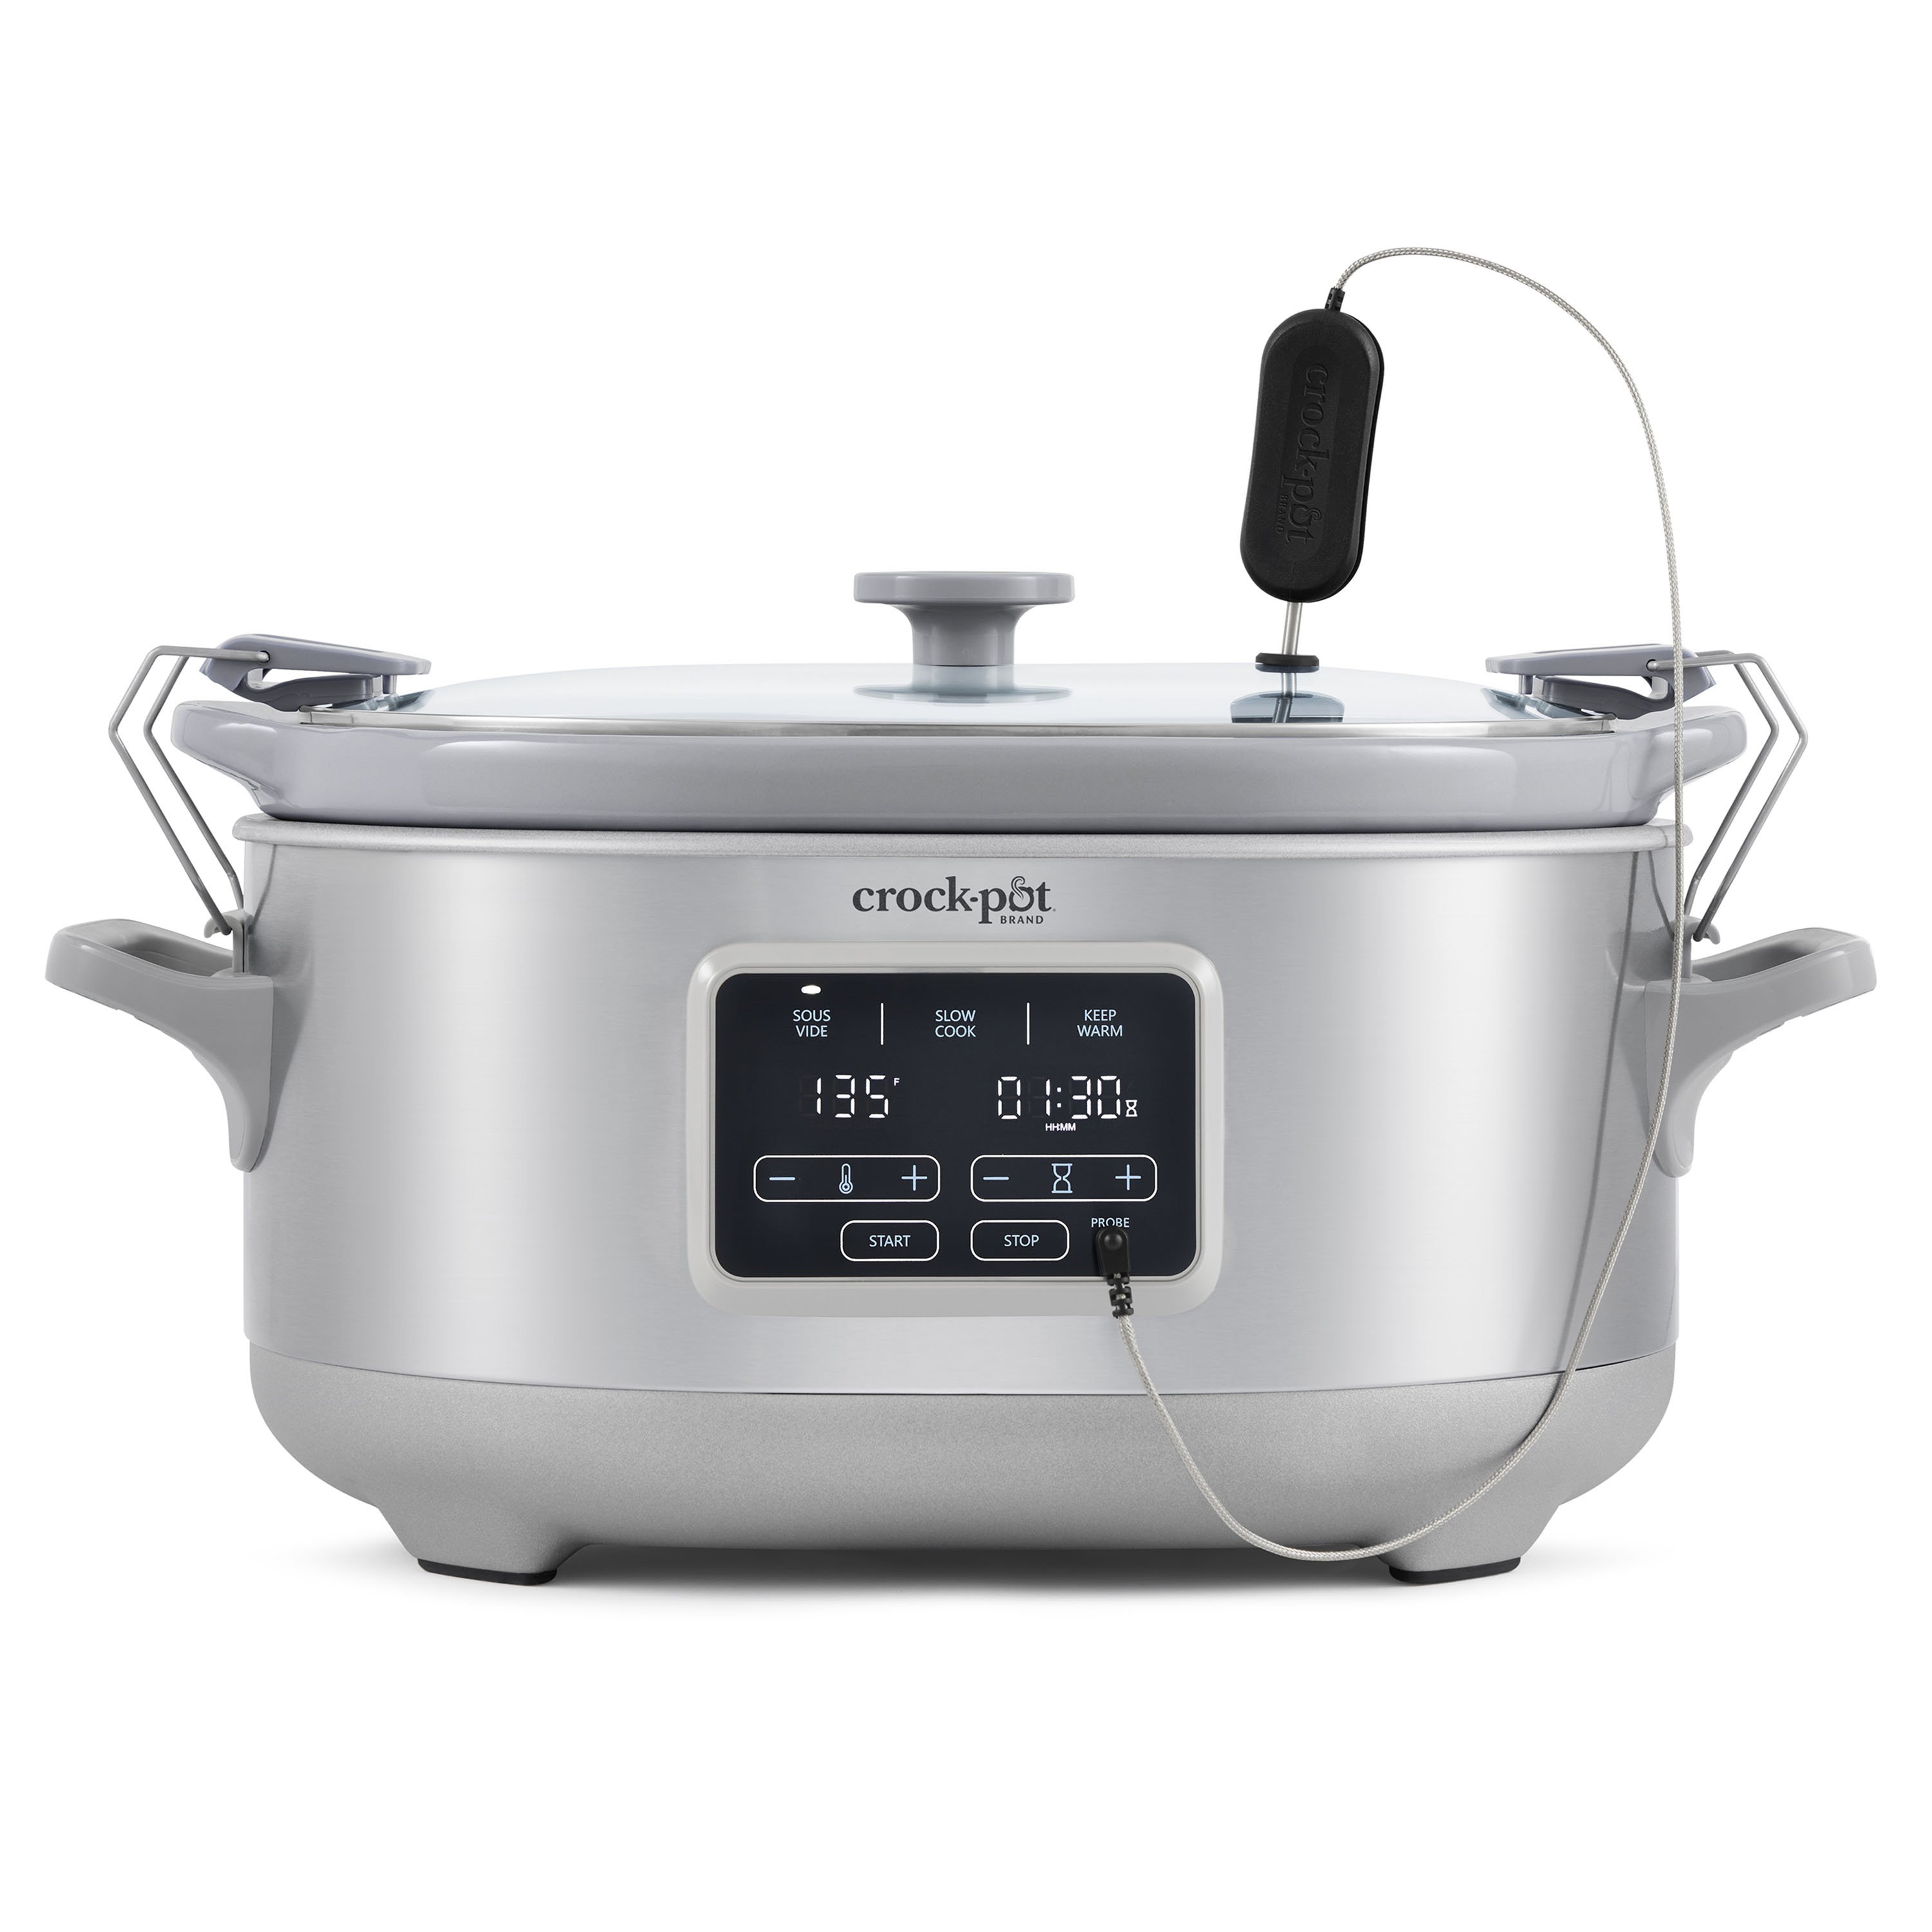 Crock-Pot 7-Quart Cook and Carry Programmable Slow Cooker, Grey 